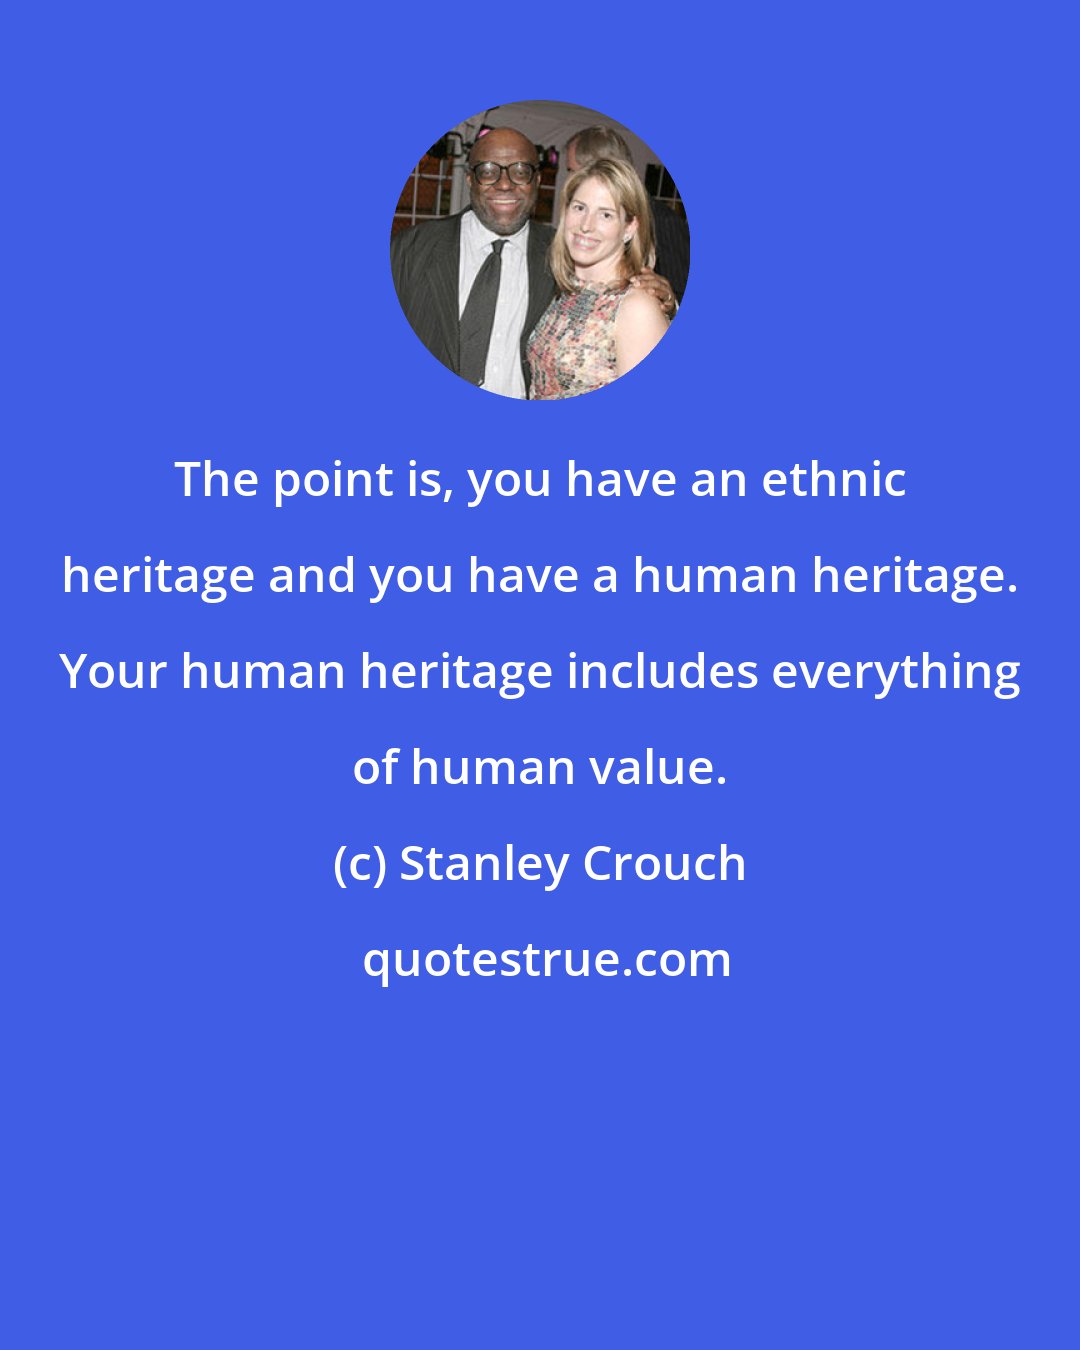 Stanley Crouch: The point is, you have an ethnic heritage and you have a human heritage. Your human heritage includes everything of human value.